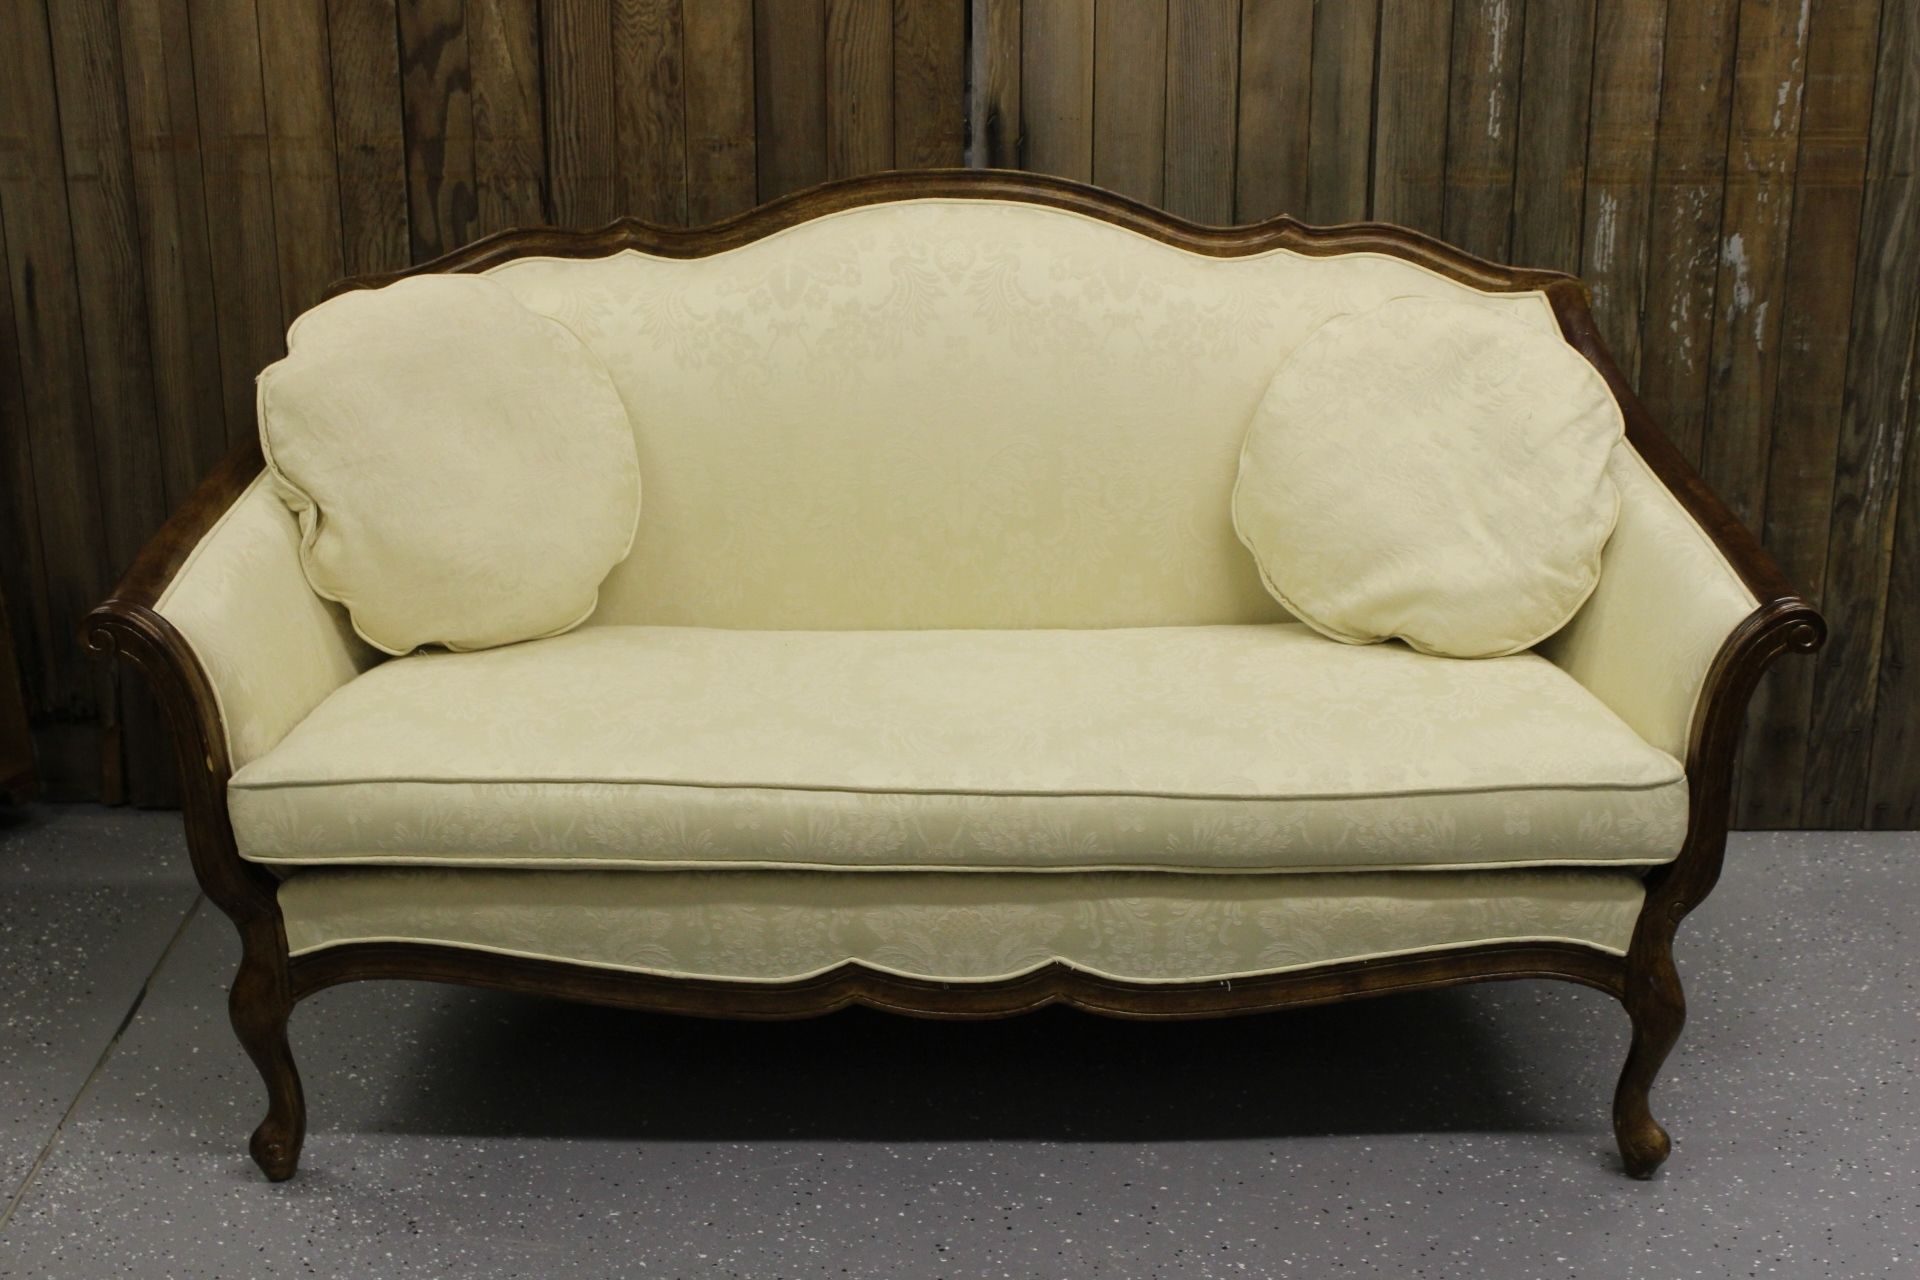 Old Fashioned Sofas With 2018 Furniture. Sofa Styles Antique: Antique Loveseat Old Fashioned (Photo 13 of 15)